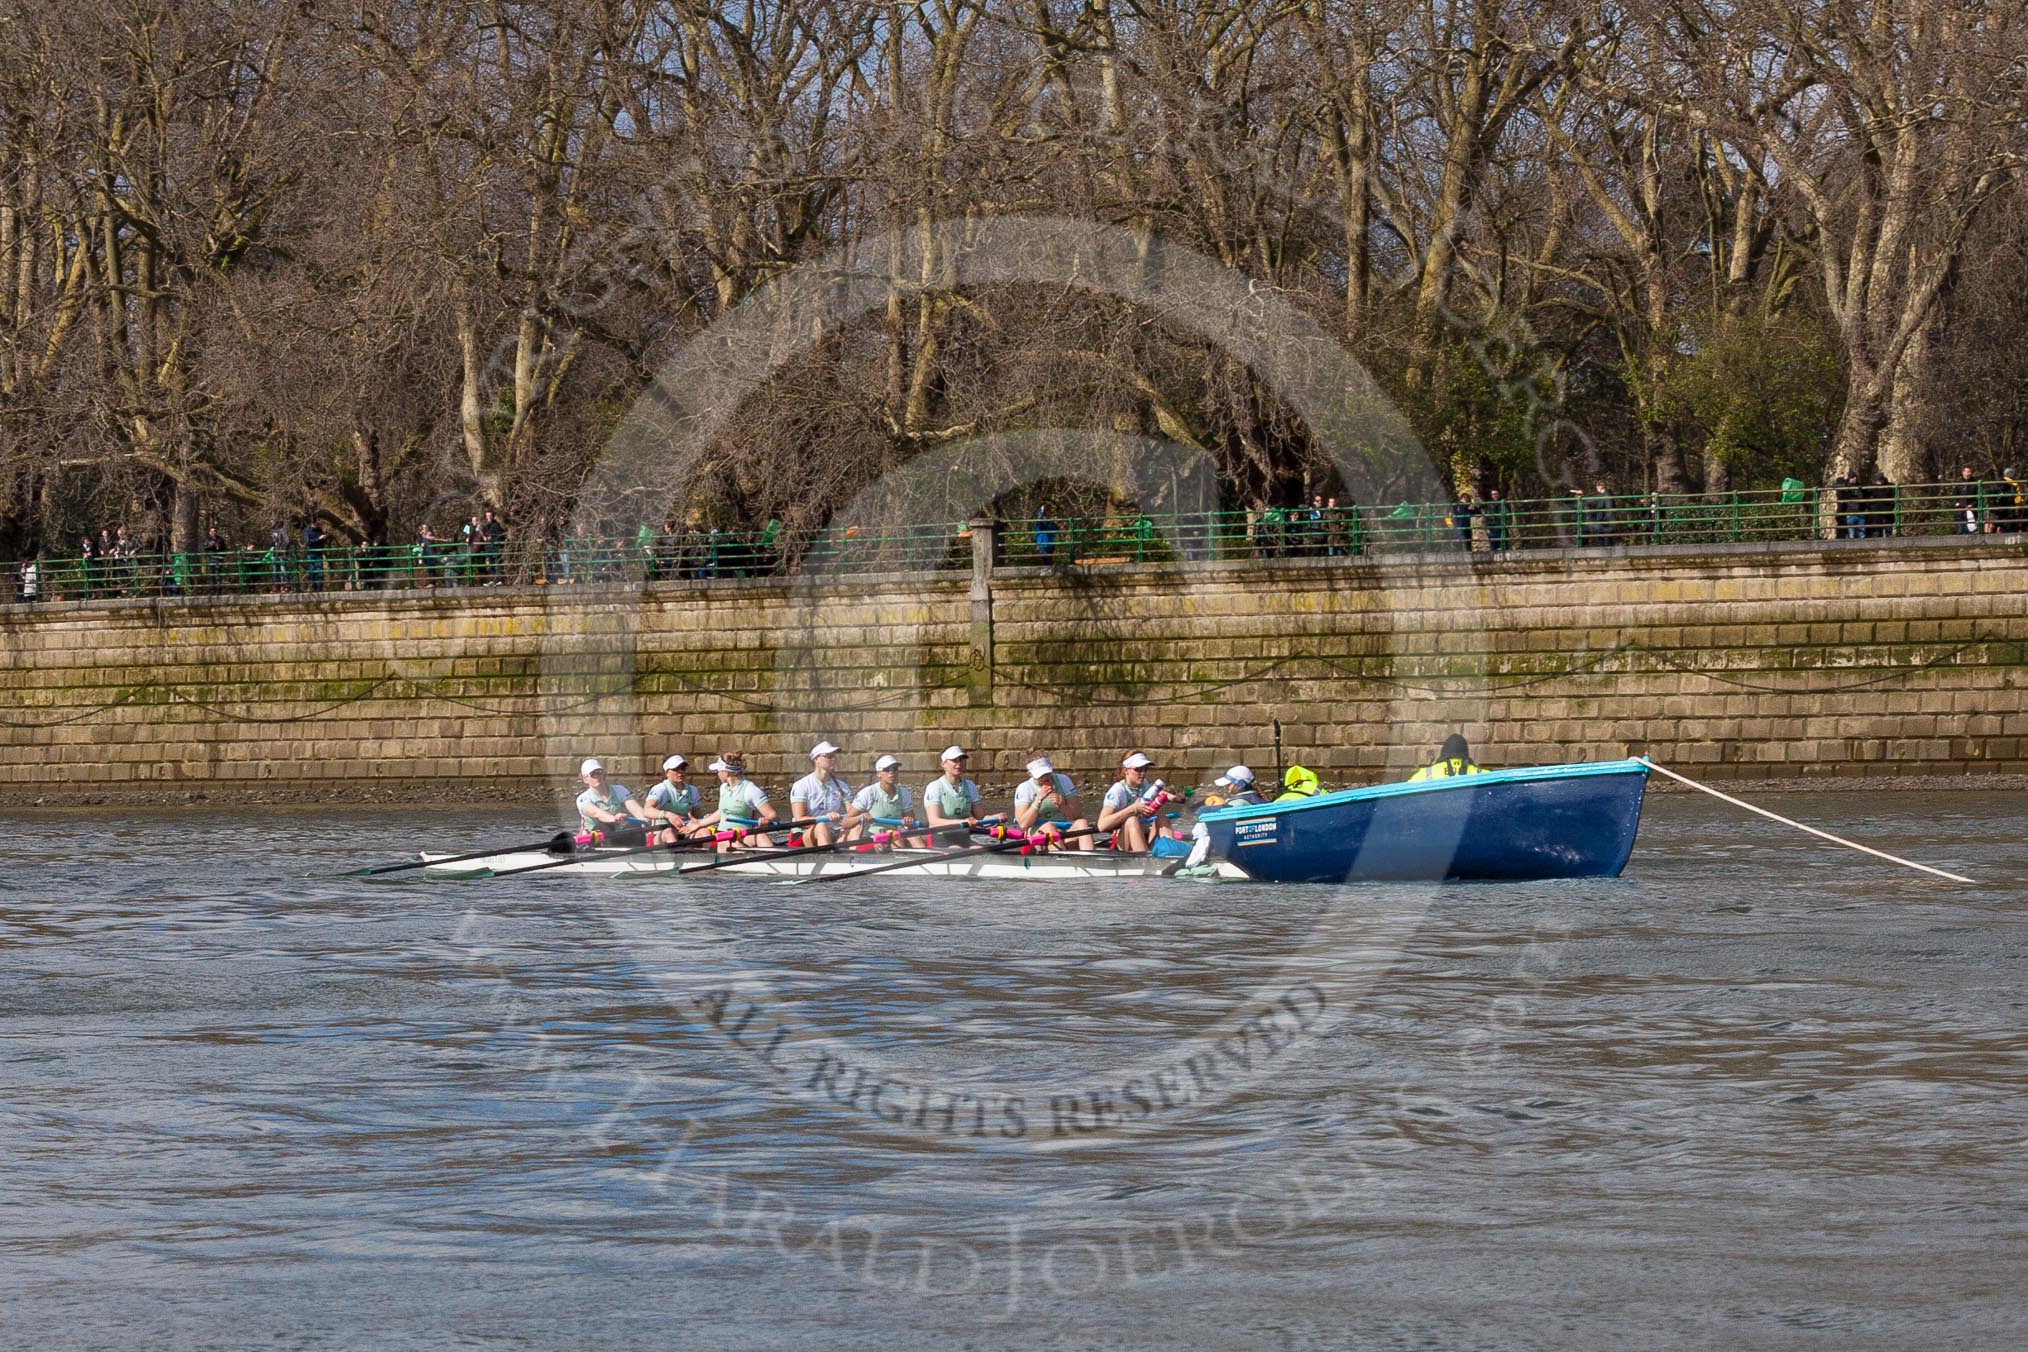 The Boat Race season 2016 -  The Cancer Research Women's Boat Race.
River Thames between Putney Bridge and Mortlake,
London SW15,

United Kingdom,
on 27 March 2016 at 14:05, image #148